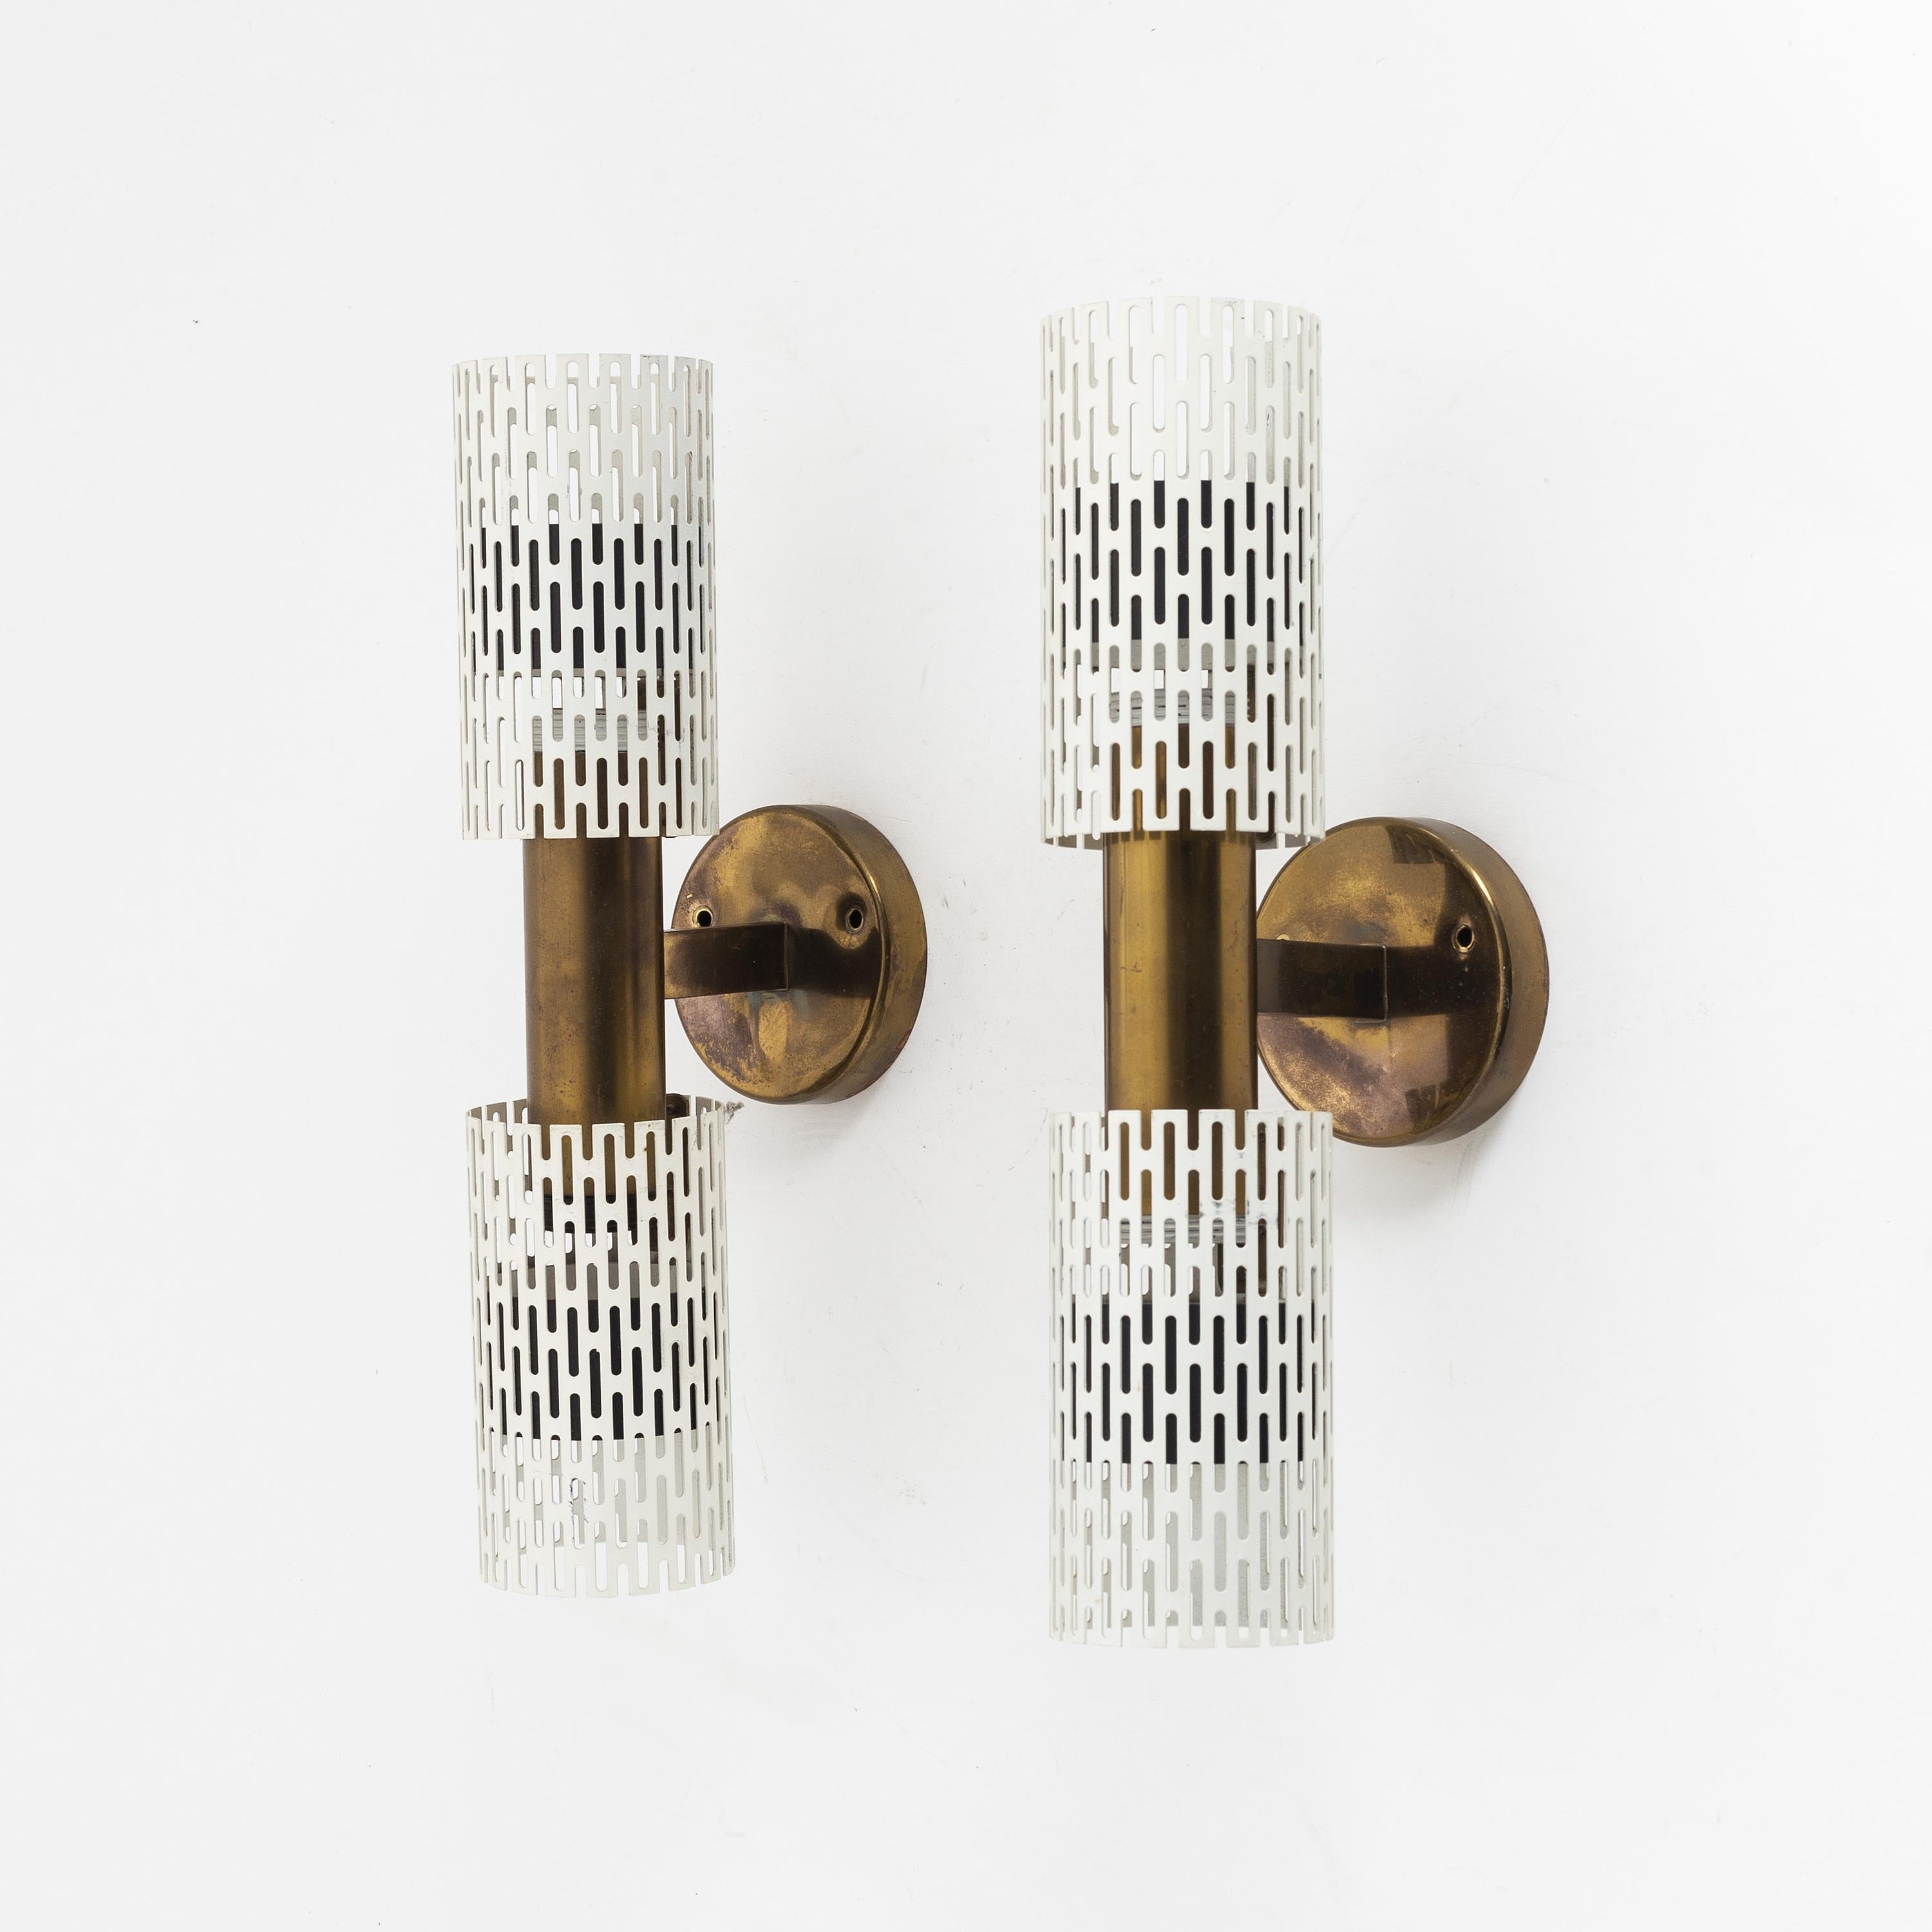 Swedish Harald Notini Rare Pair of Sconces Model 11262 for Bohlmarks, 1950 For Sale